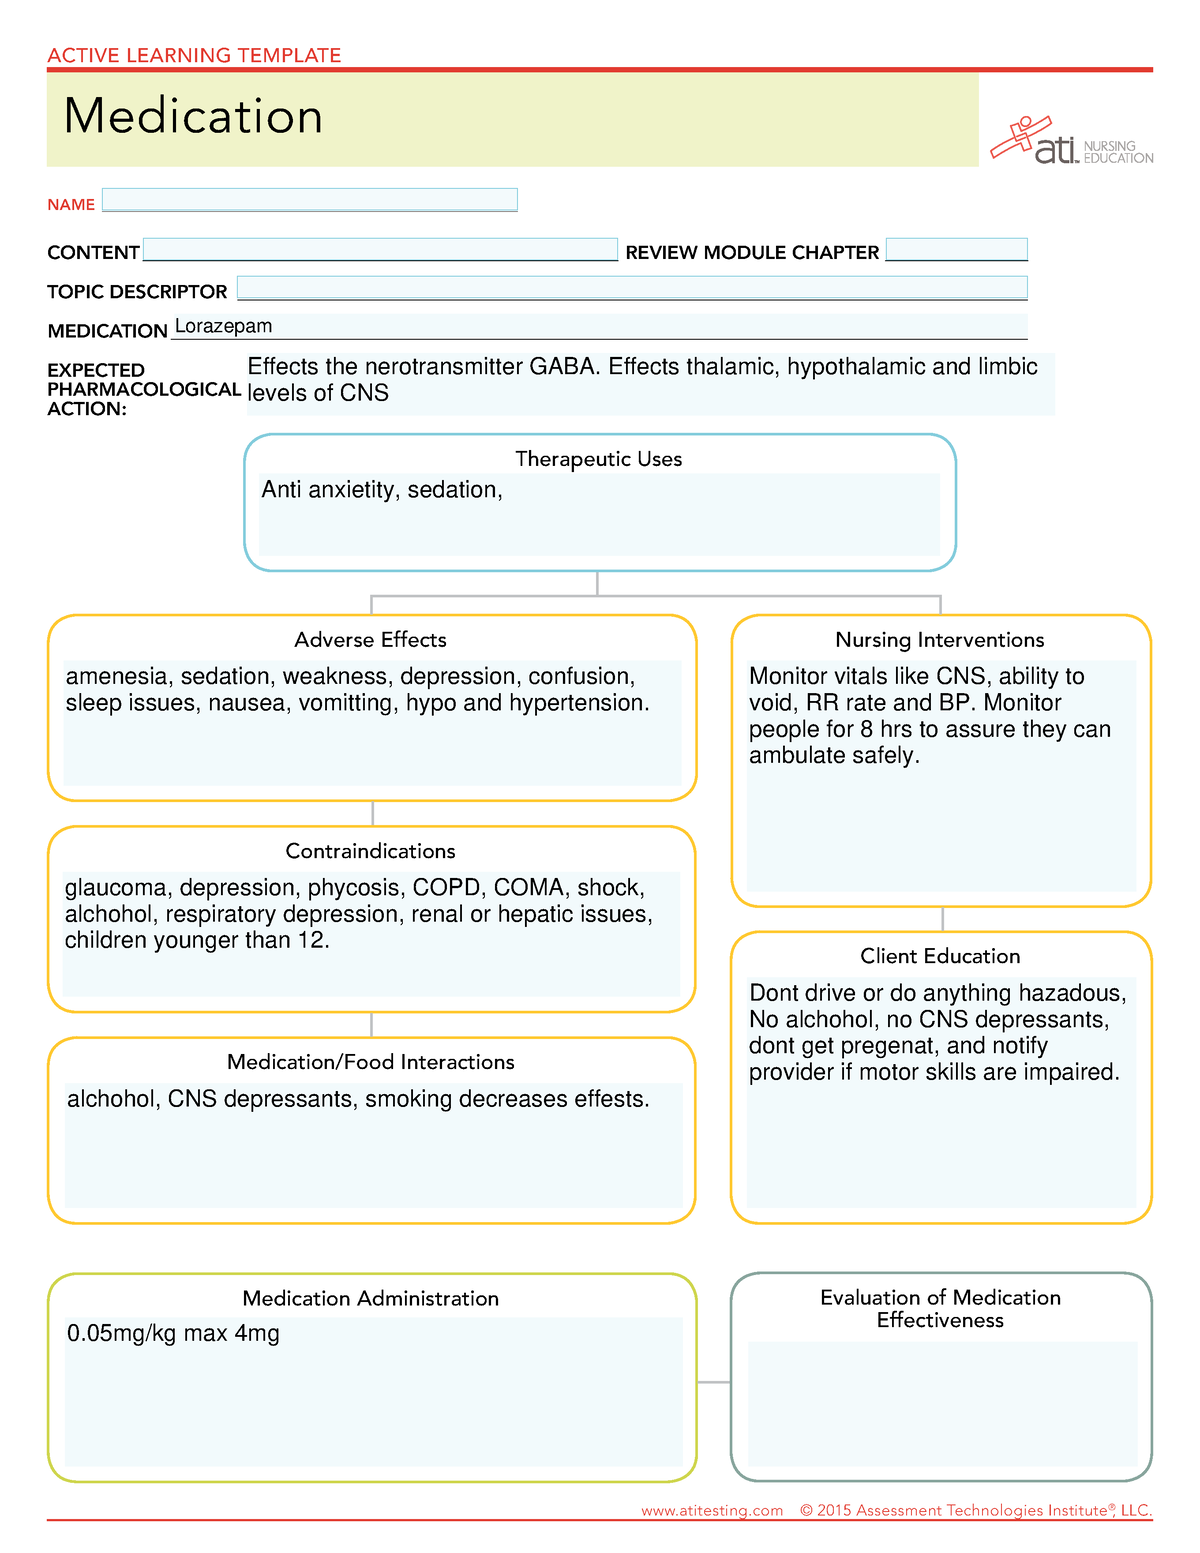 Lorazepam medication card Adverse Effects Contraindications